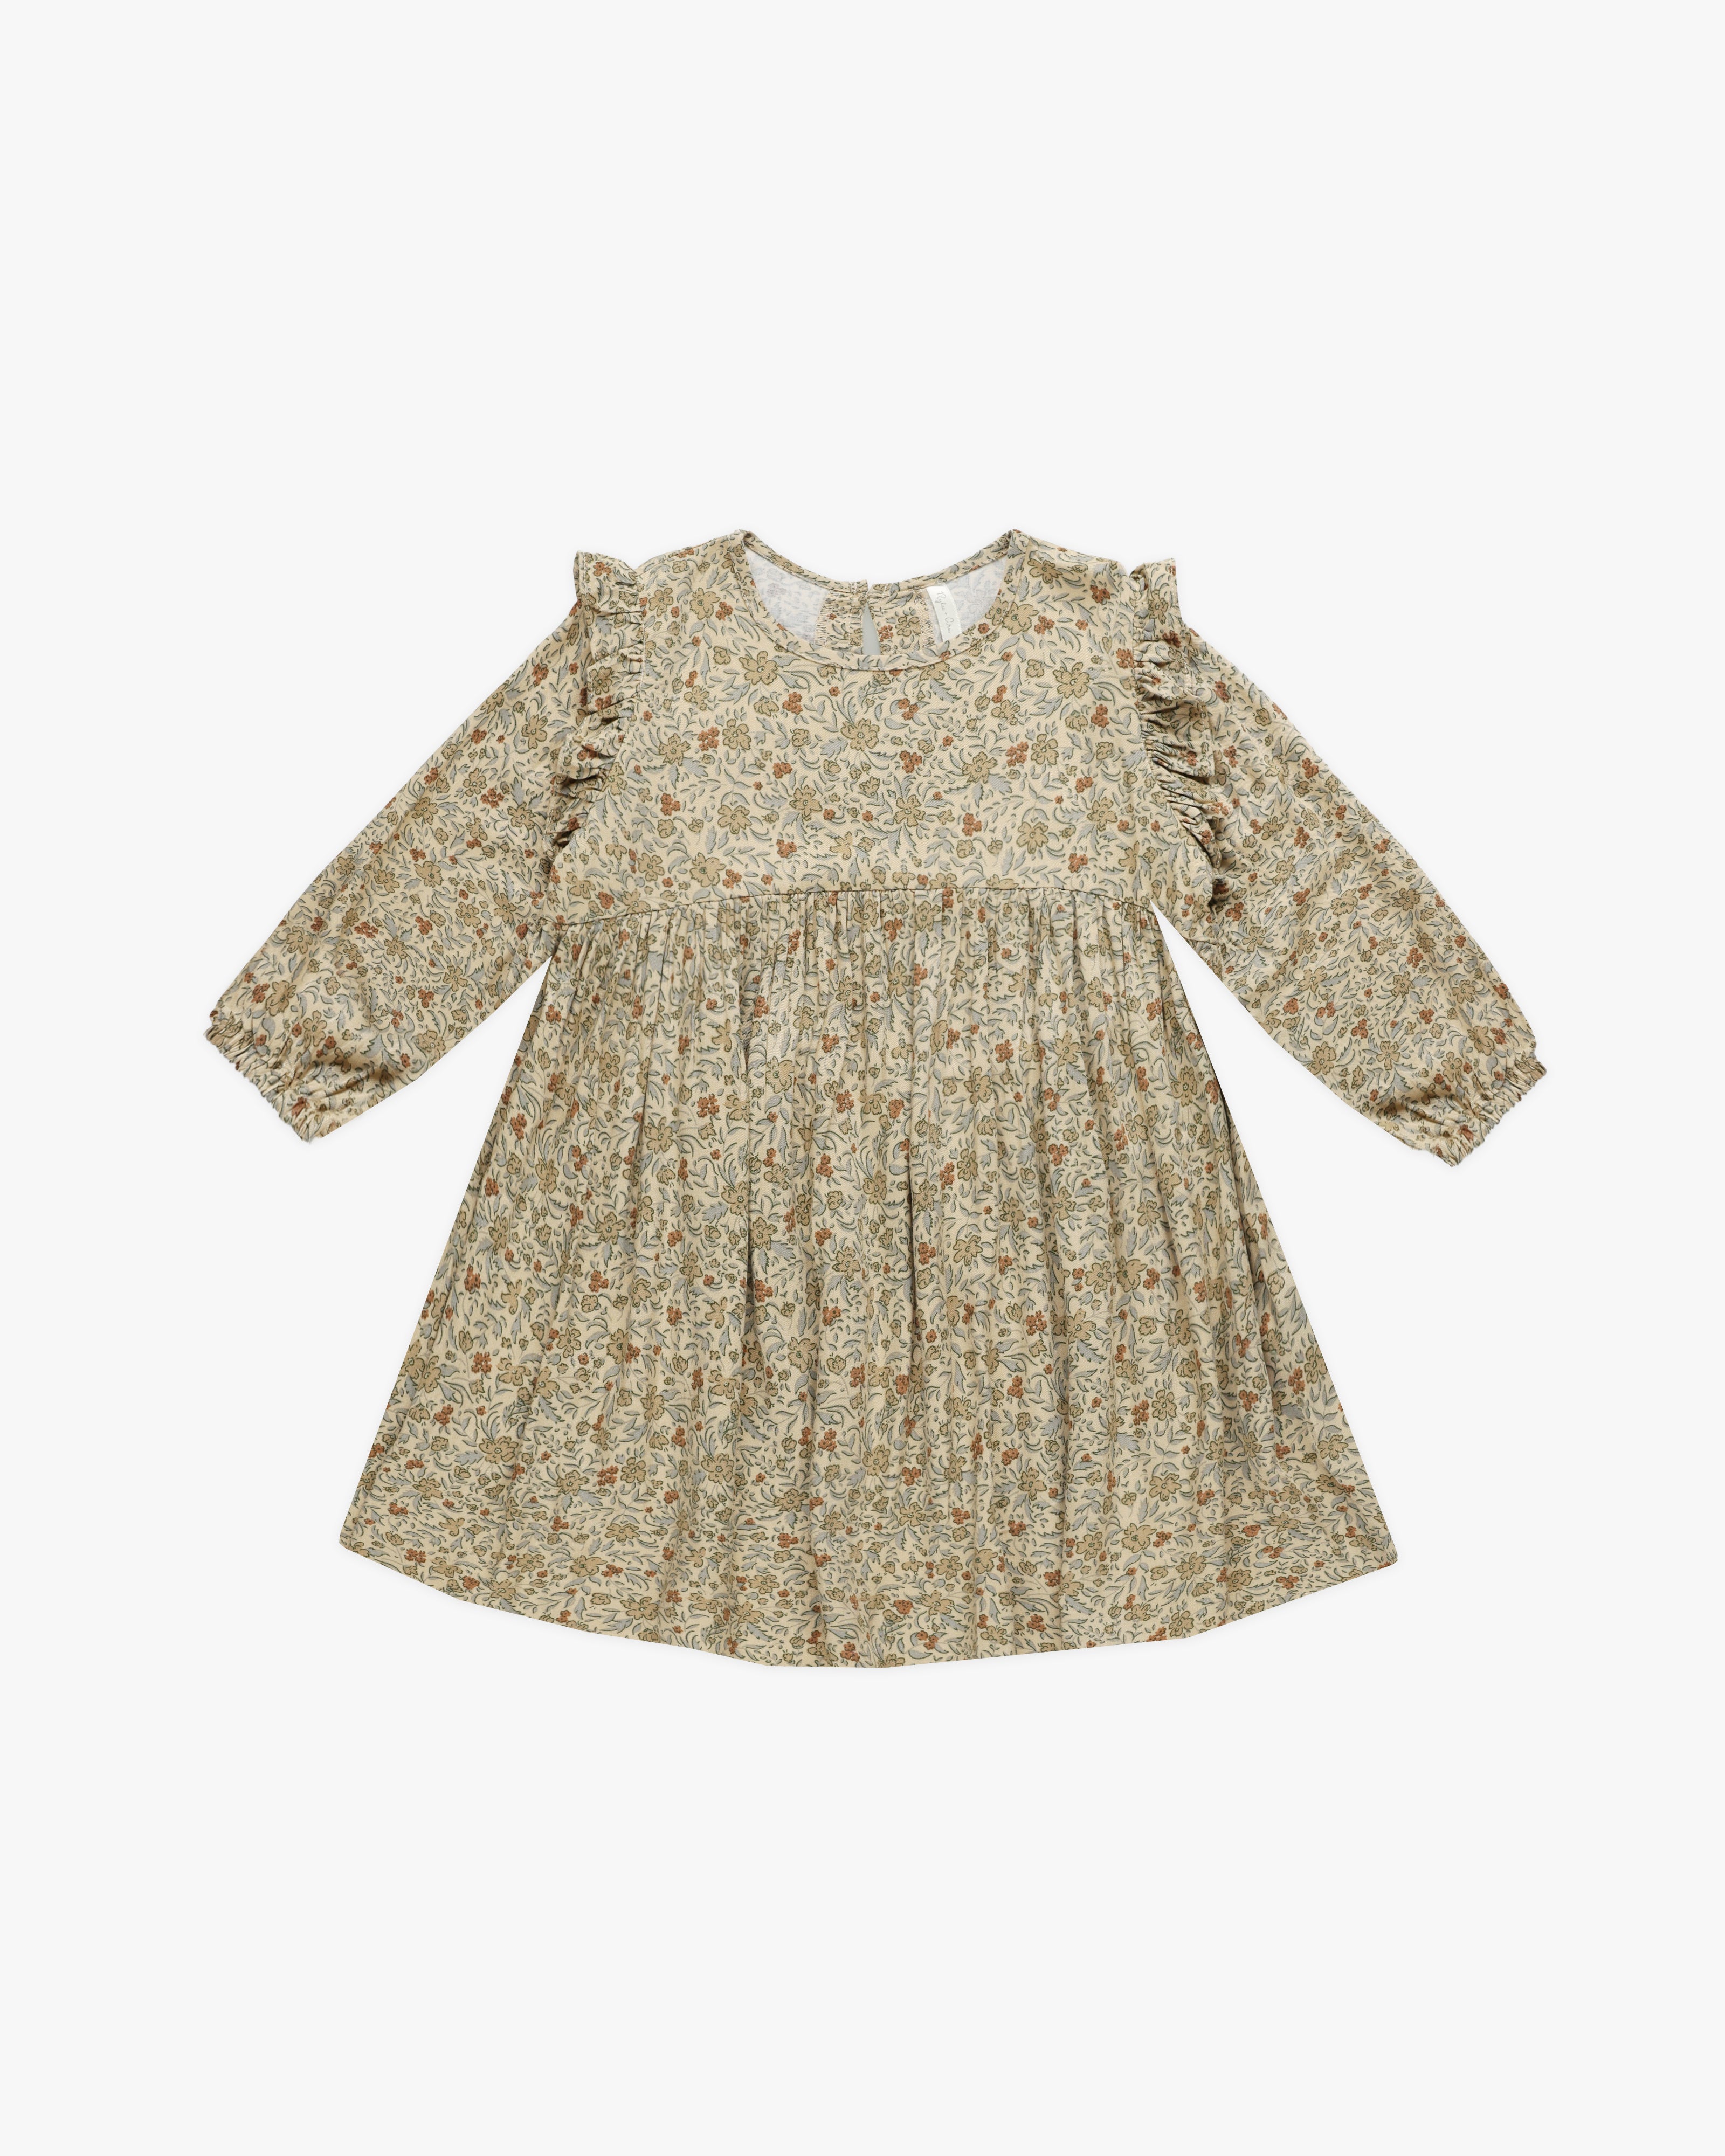 Piper Dress || Golden Garden - Rylee + Cru | Kids Clothes | Trendy Baby Clothes | Modern Infant Outfits |